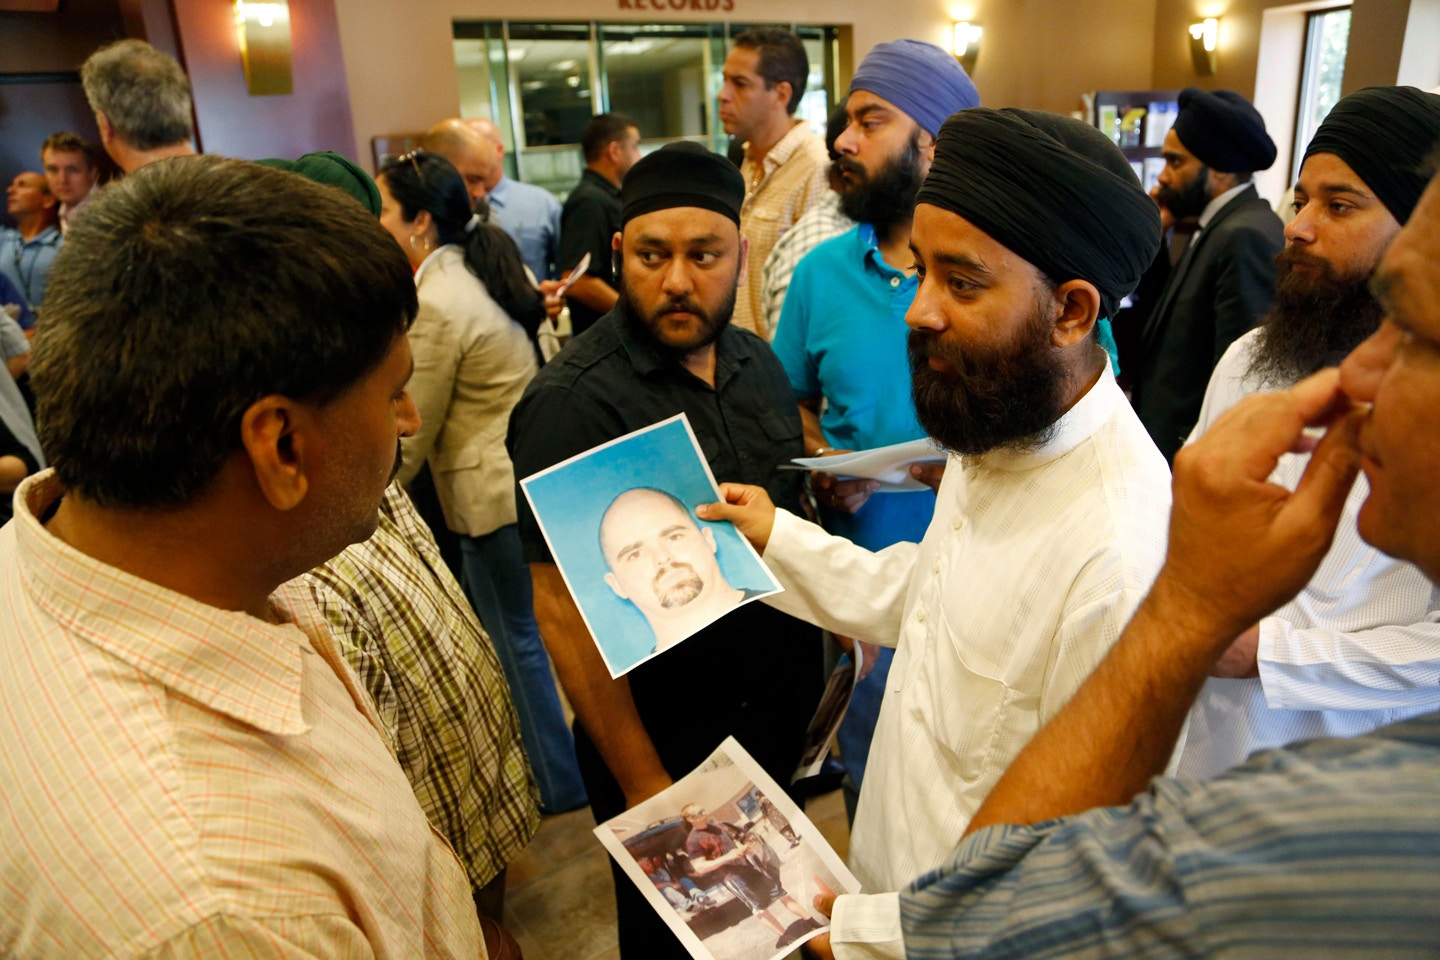 OAK CREEK, WI - AUGUST 6: Members of the community hold up the mug shot handed out by the FBI of the suspected shooter Wade Michael Page after a press conference on the shooting at the Sikh Temple of Wisconsin where yesterday a gunman fired upon people at service August, 6, 2012 in Oak Creek, Wisconsin. At least six people were killed when the shooter identified as Wade Michael Page opened fire on congregants in the Milwaukee suburb. The suspect who was a United States Army veteran was killed in a shootout with  police.  (Photo by Darren Hauck/Getty Images)